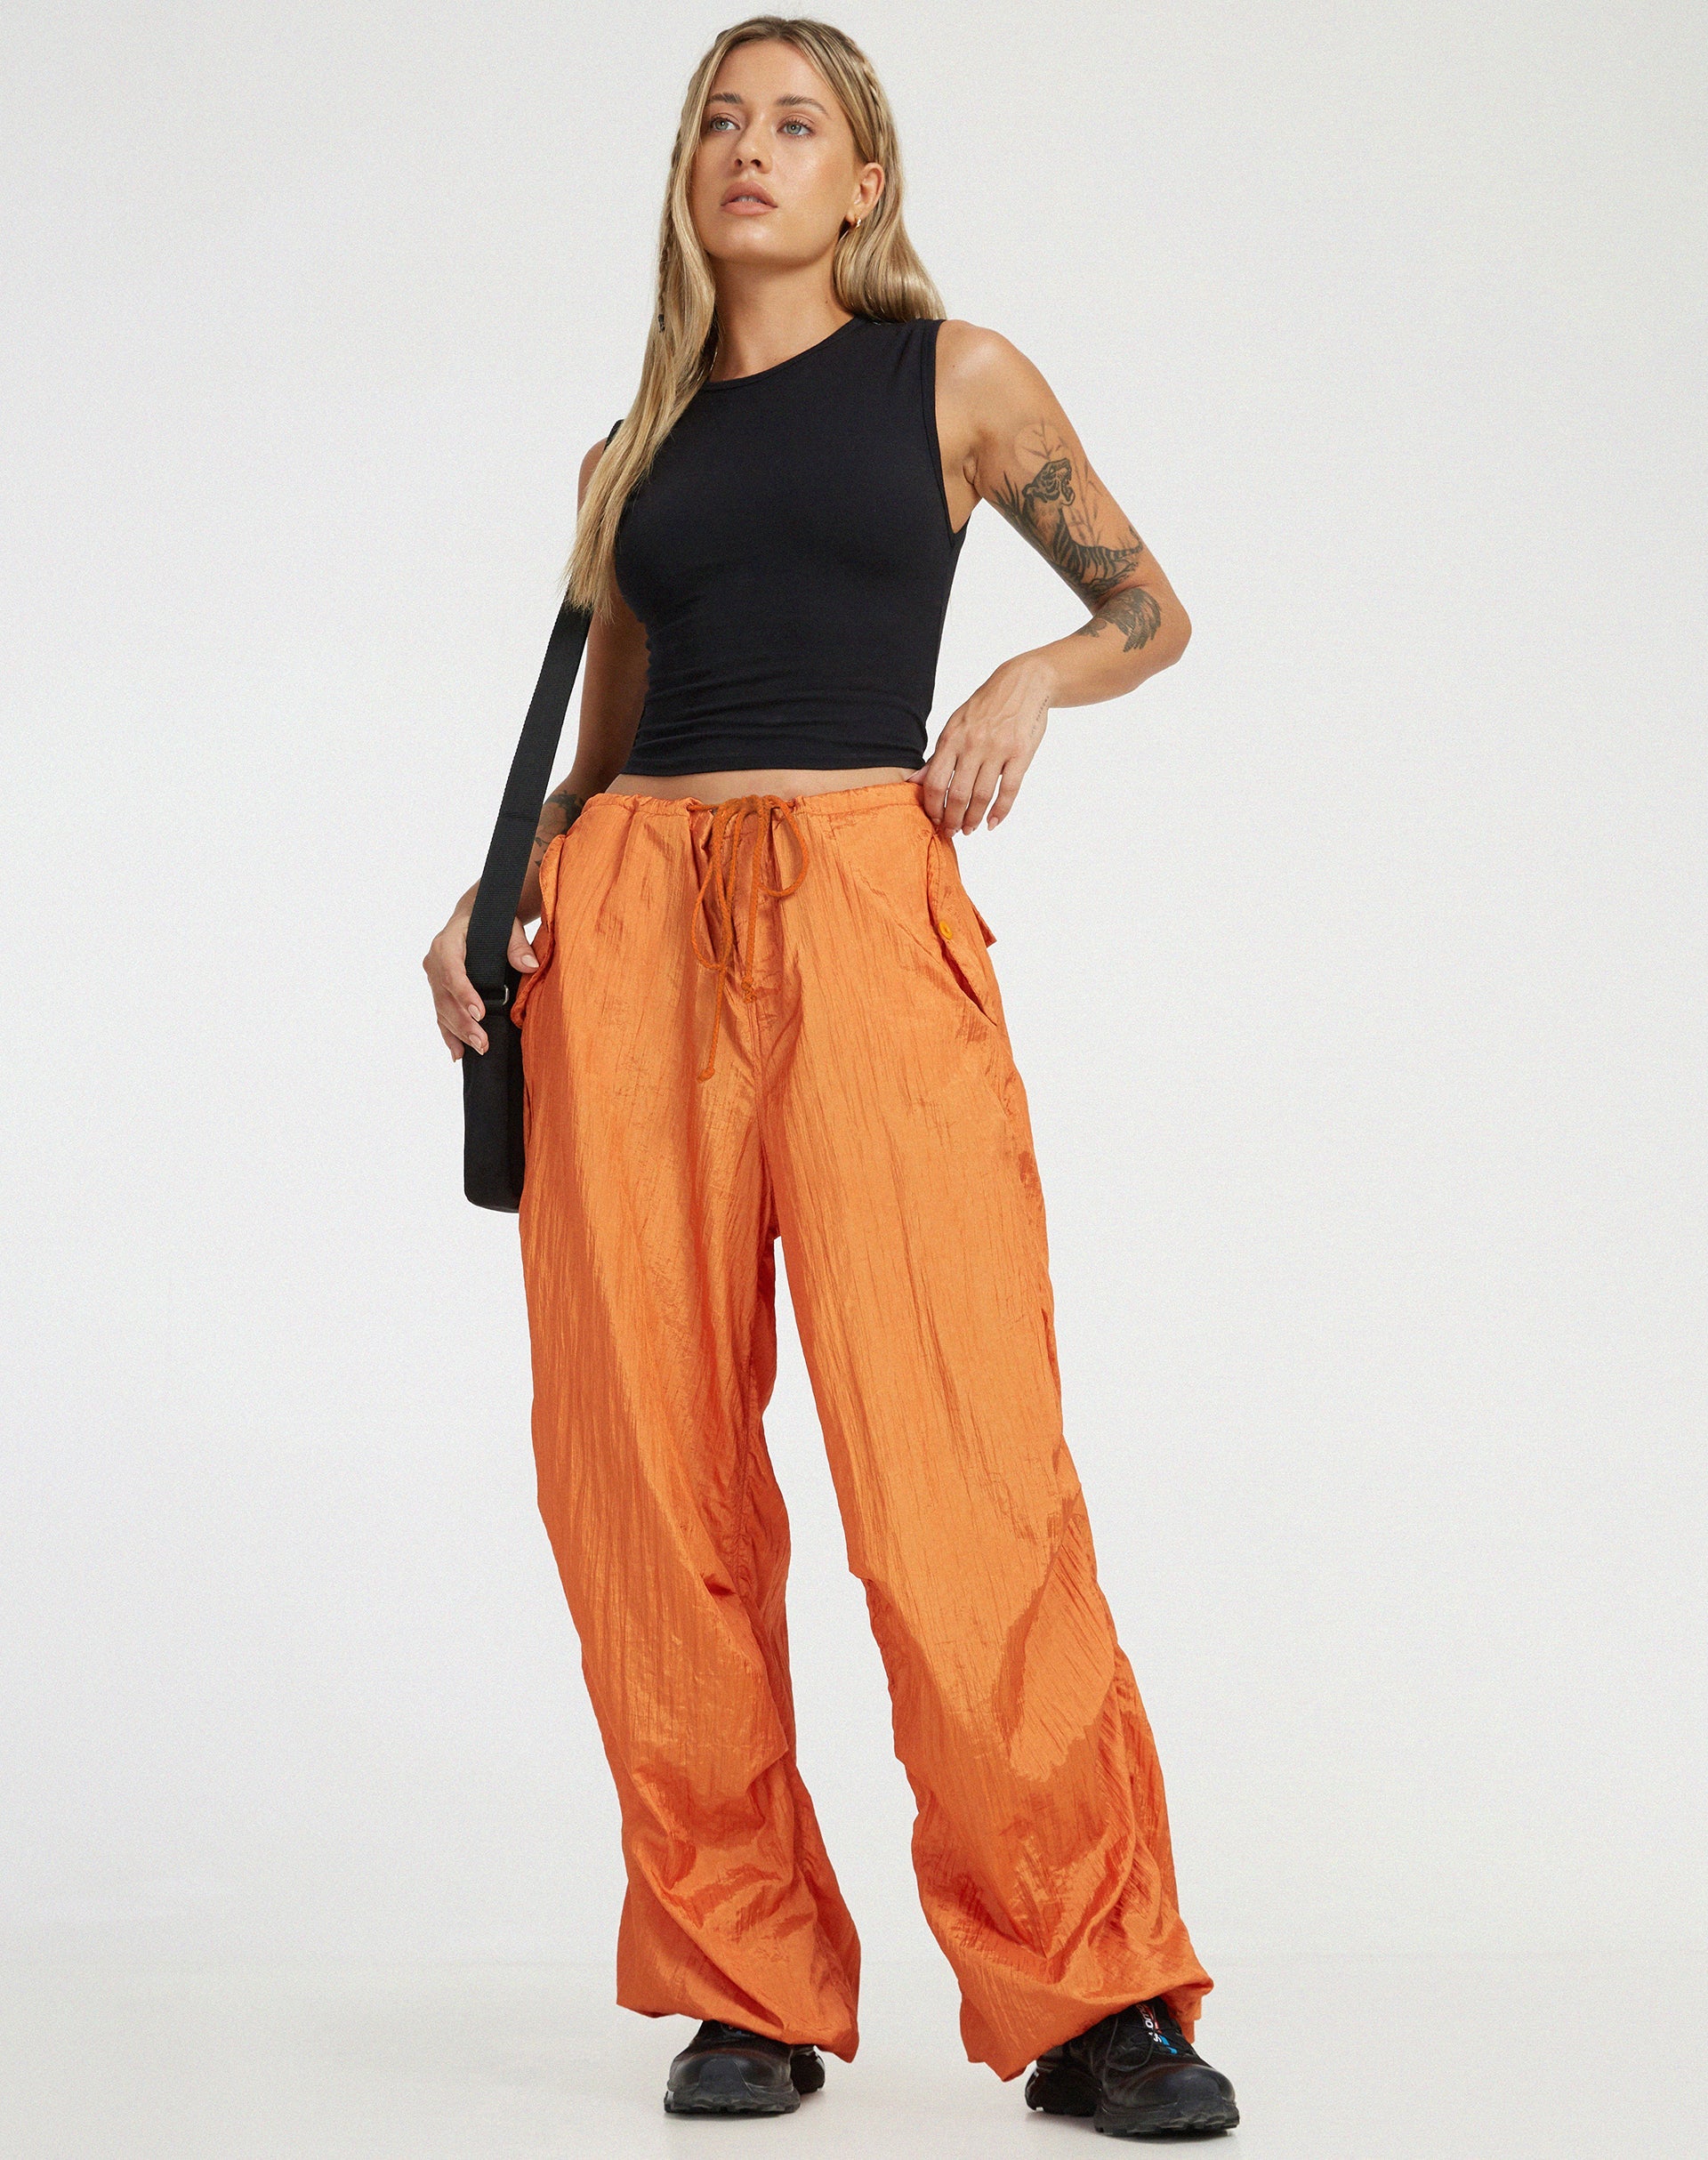 Orange Cargo Pants With Pockets Fashion Classic Summer Men039s Sweatpants  Black Hip Hop Homme Trousers Military Army Joggers T21295982 From N4uo,  $37.24 | DHgate.Com